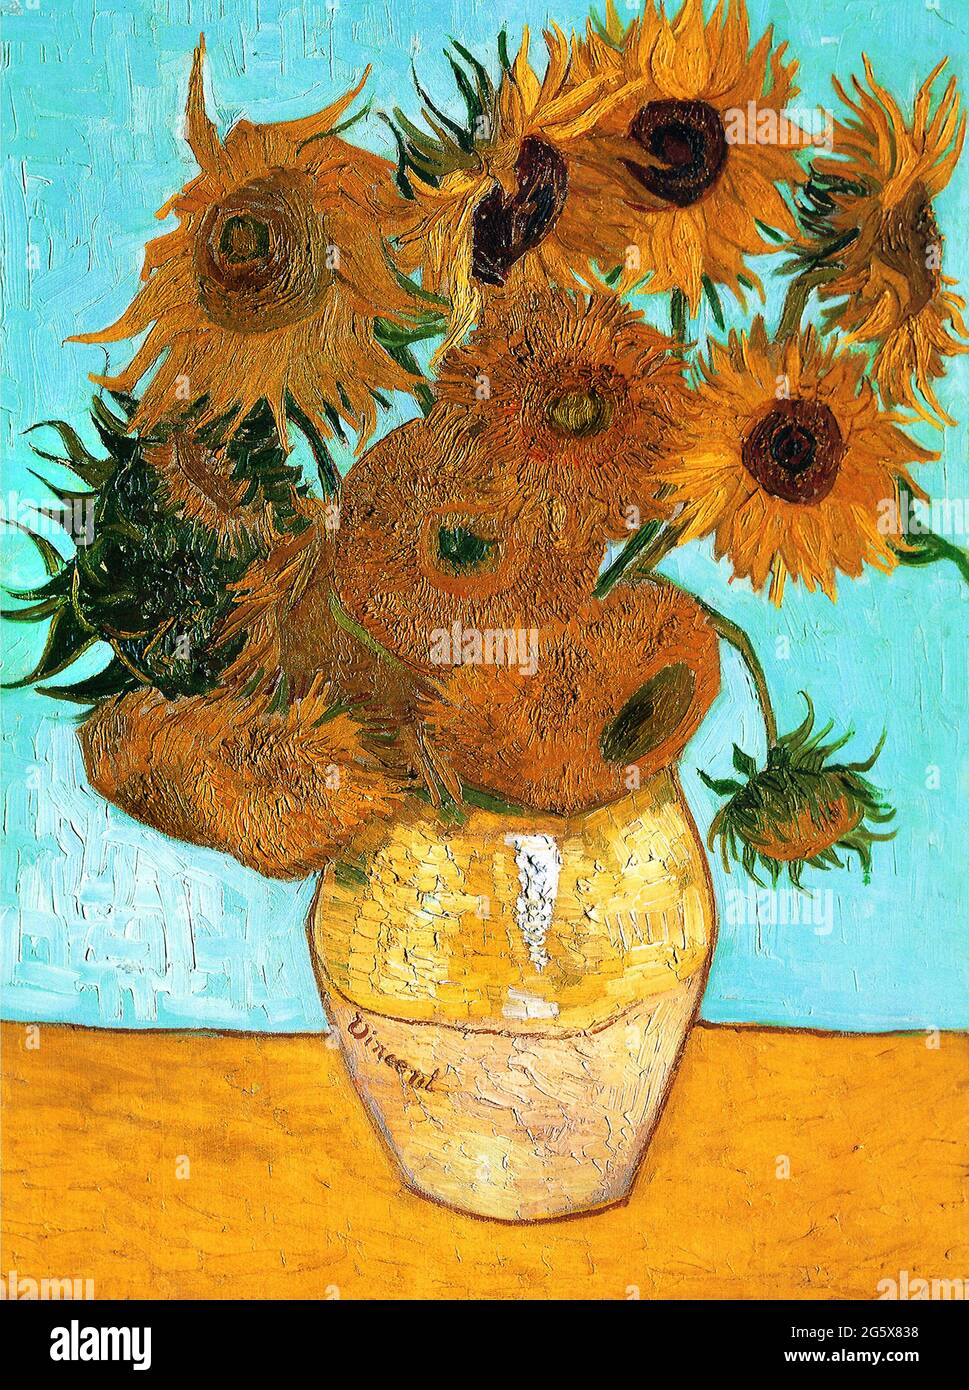 Vase With Twelve Sunflowers by Vincent Van Gogh 1889. the Bavarian State Painting Collections in Munich, Deutschland Stock Photo